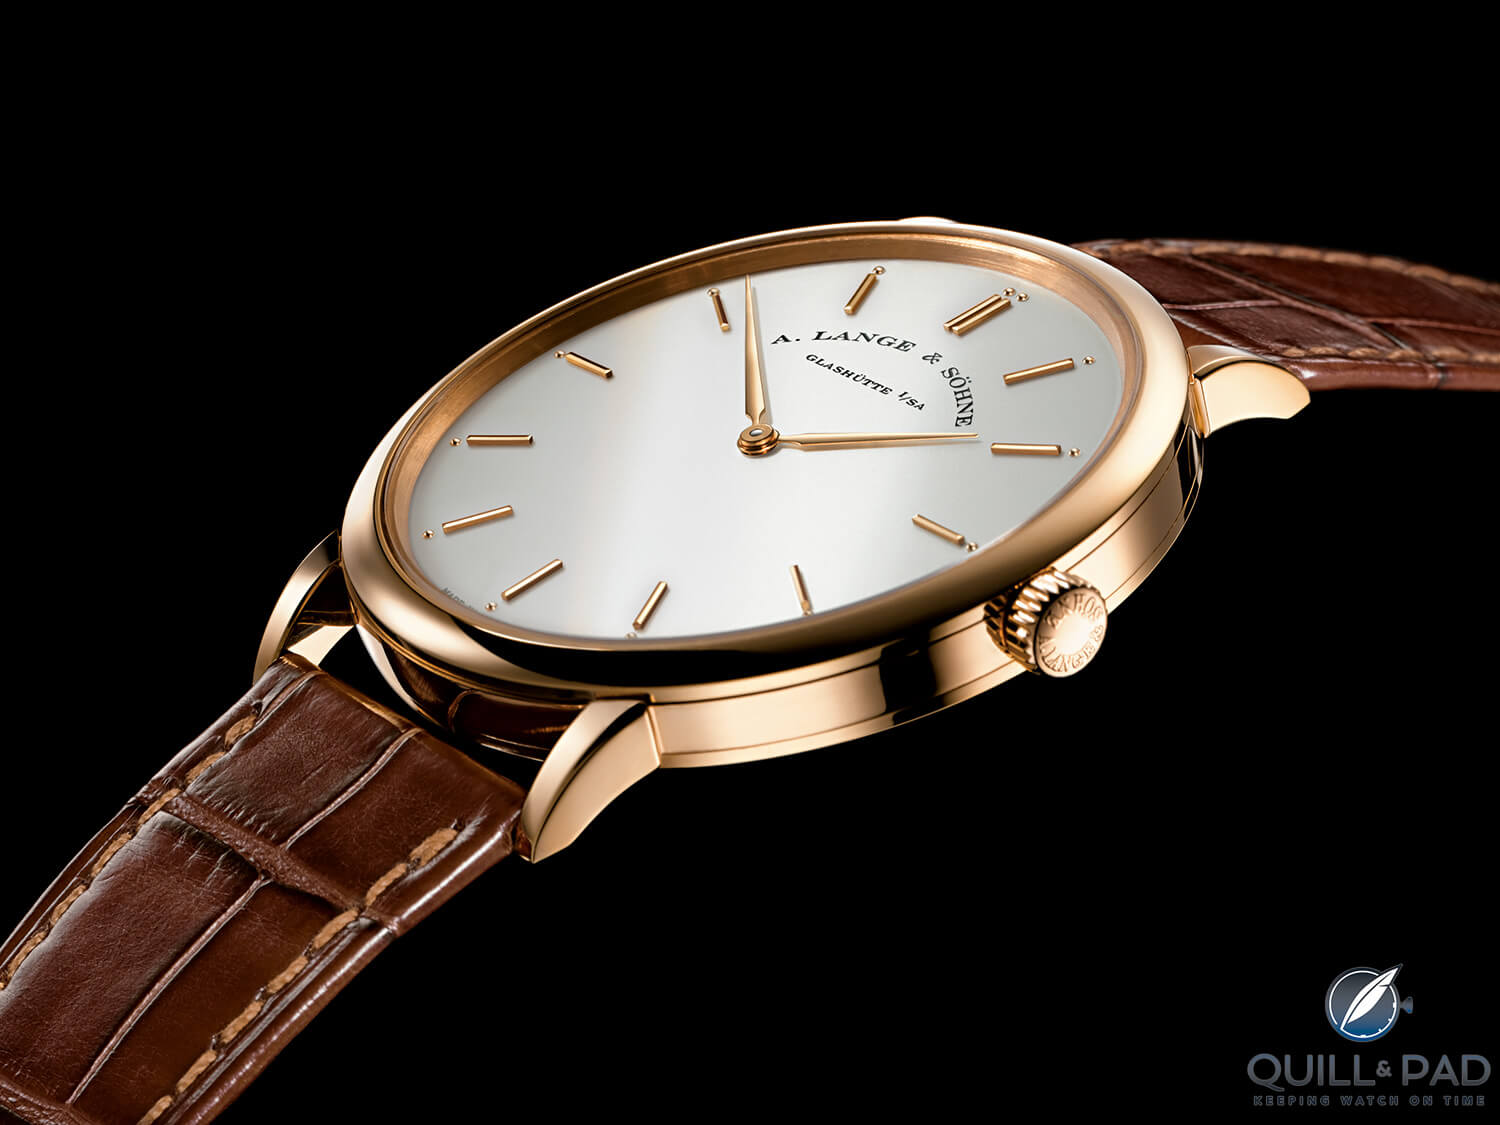 A. Lange & Söhne Saxonia Thin from 2011